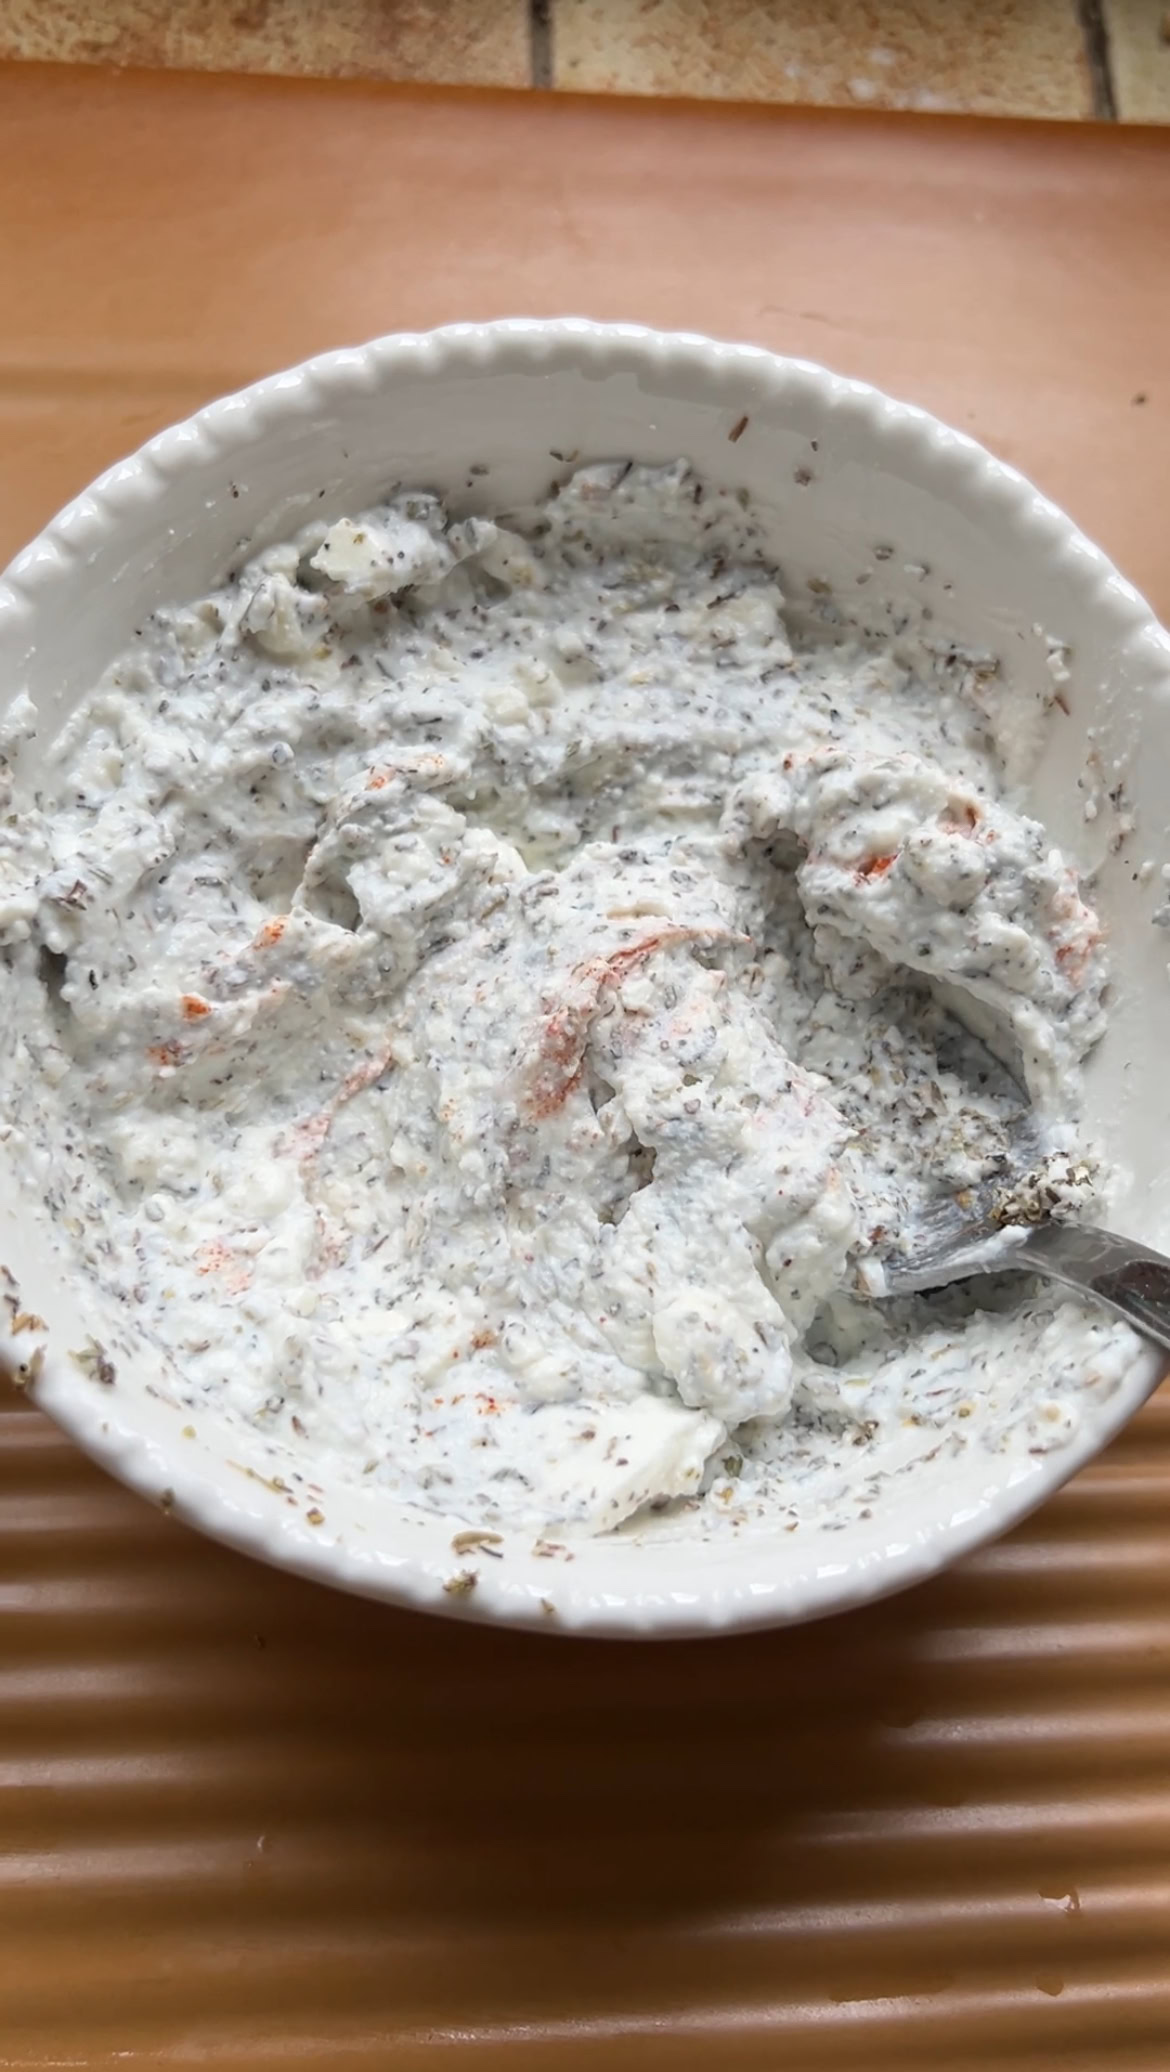 Feta, ricotta, oregano, thyme, lemon juice and cayenne pepper in a small white bowl, mixed with a tablespoon.